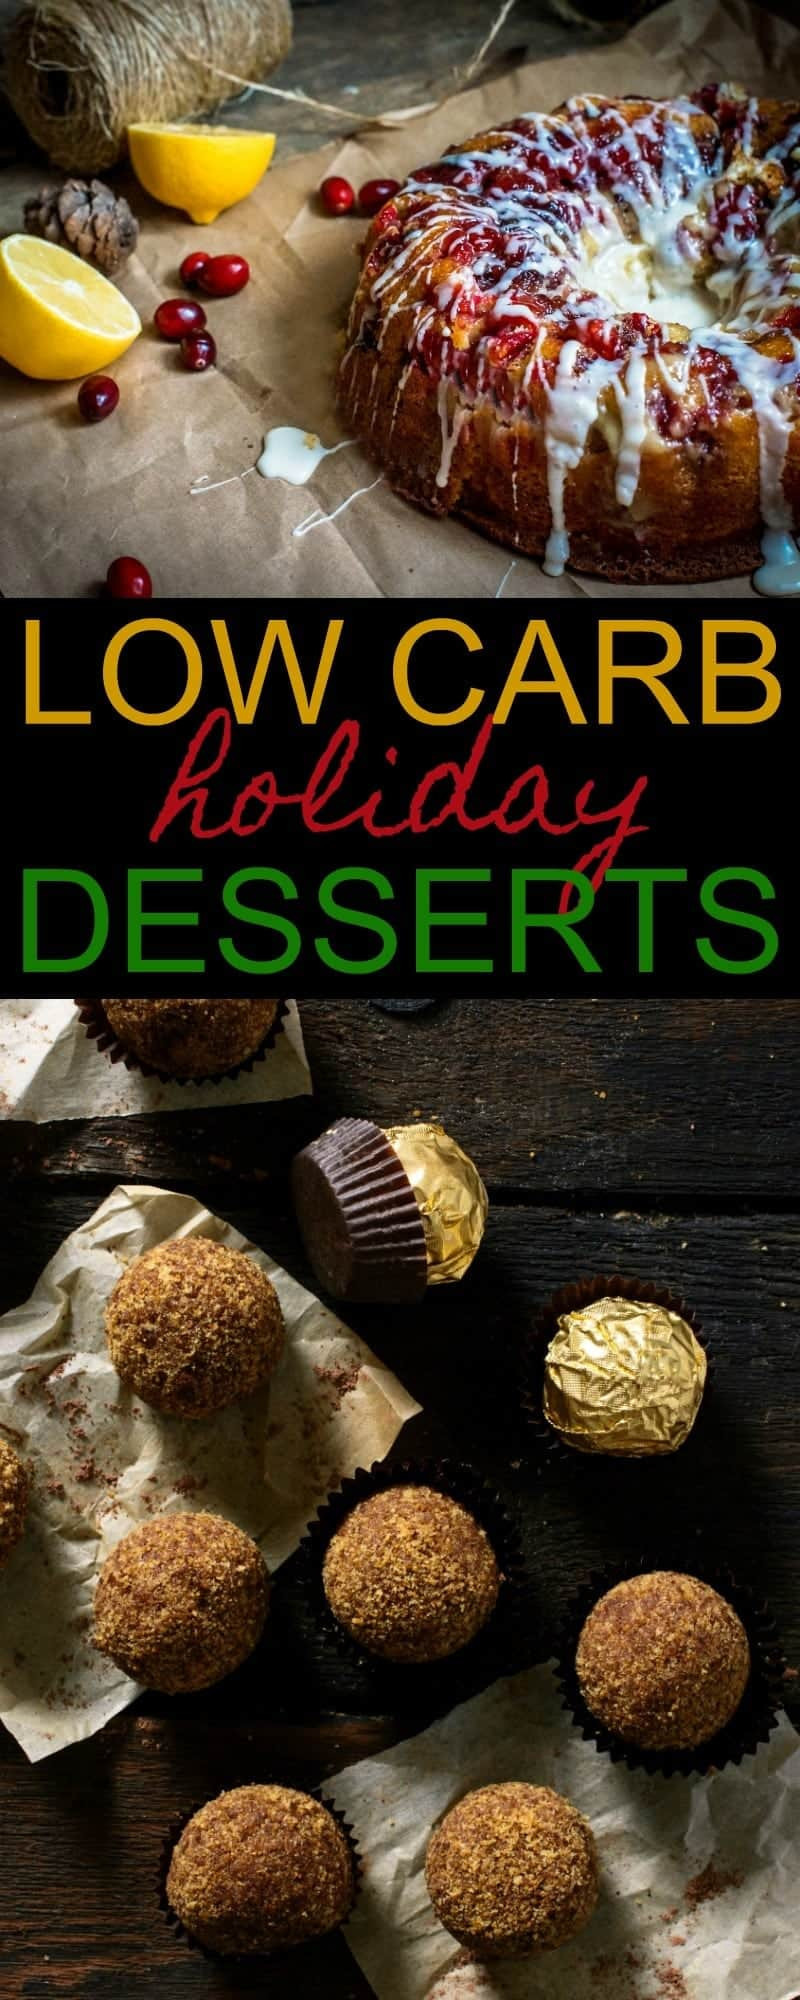 Low Carb Christmas Recipes
 Low Carb Holiday Desserts 15 Delicious Recipes 730